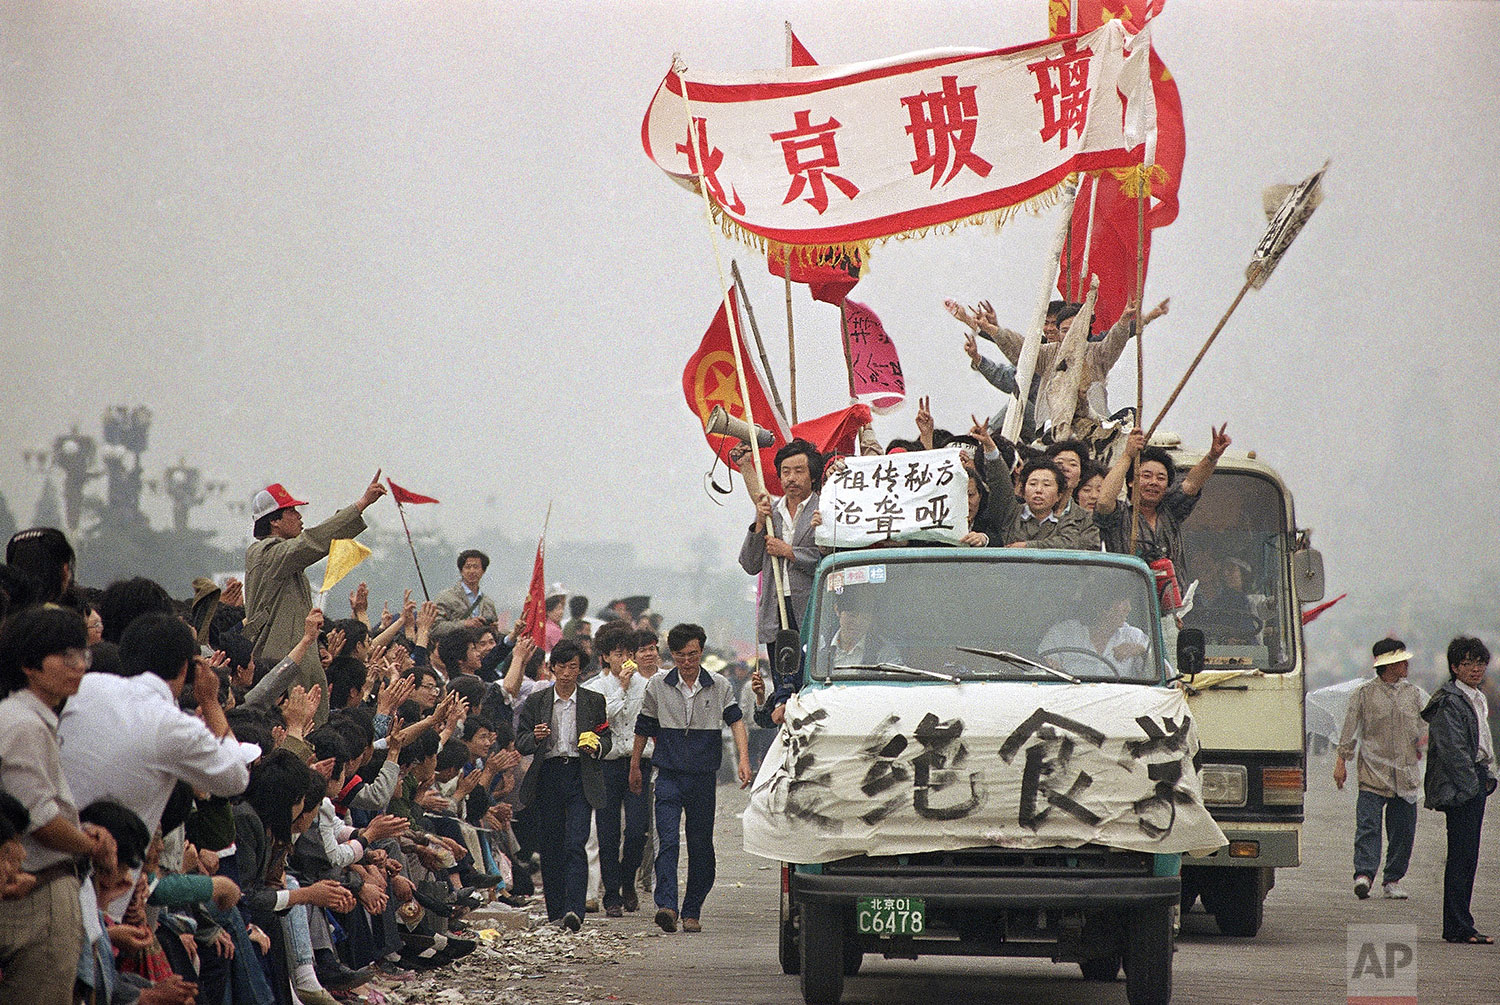  Enthusiastic demonstrators are cheered by bystanders as they arrive at Tiananmen Square to show support for the student hunger strike, Thursday, May 18, 1989, Beijing, China. Students are striking for government reforms. (AP Photo/Sadayuki Mikami) 